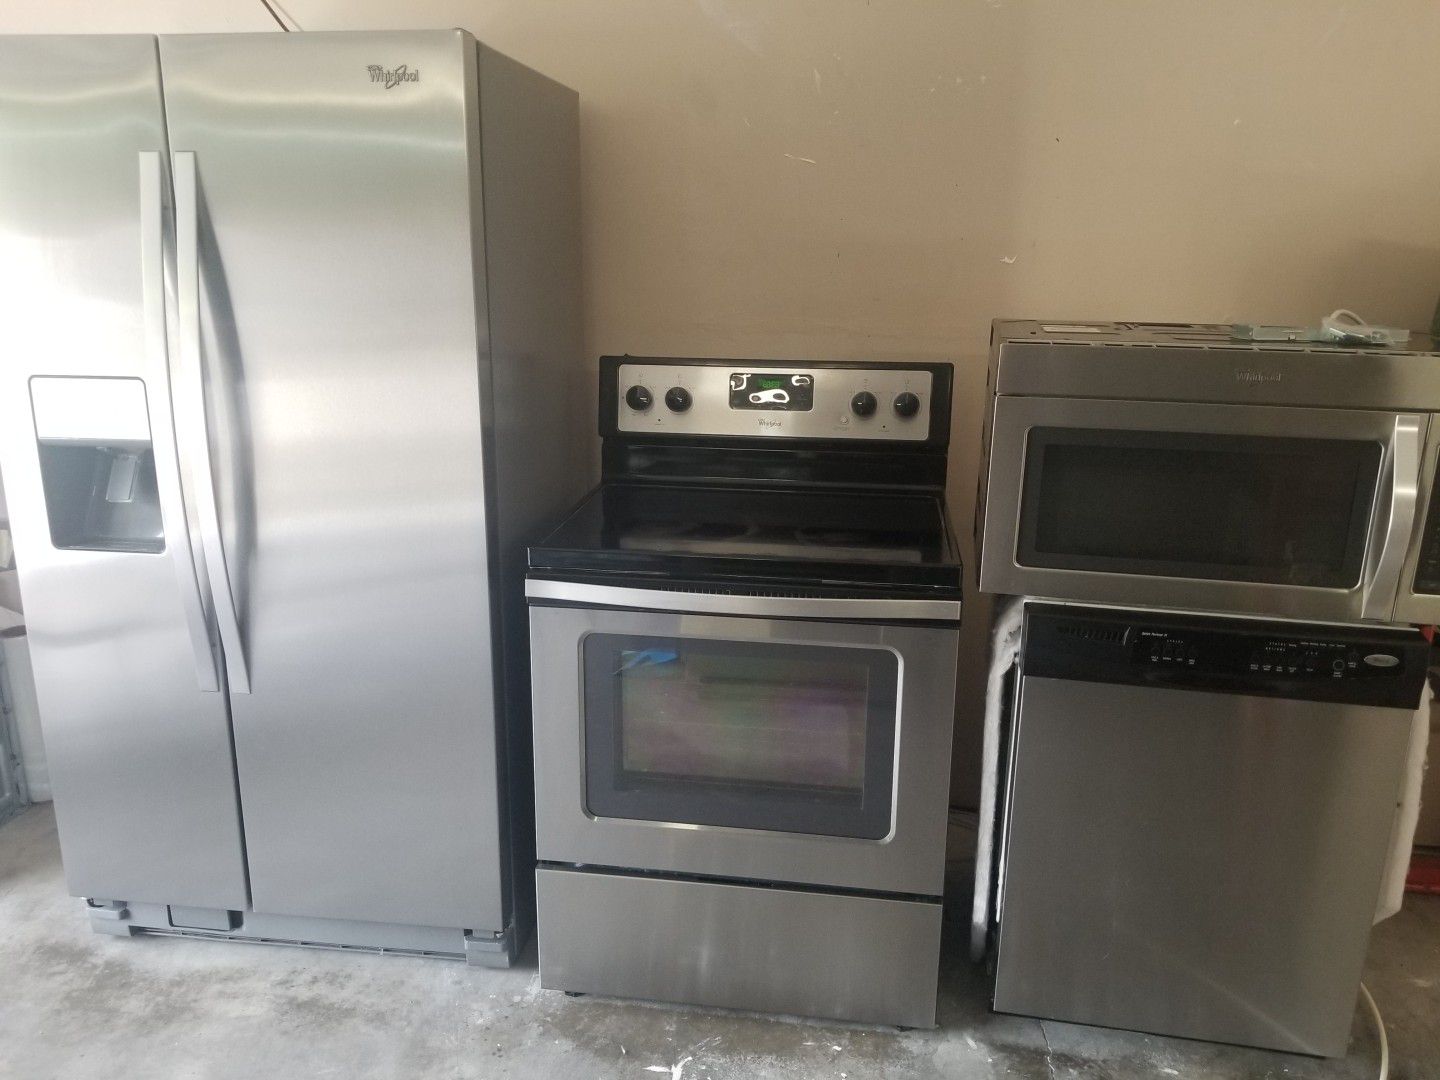 Whirlpool stainless steel appliances